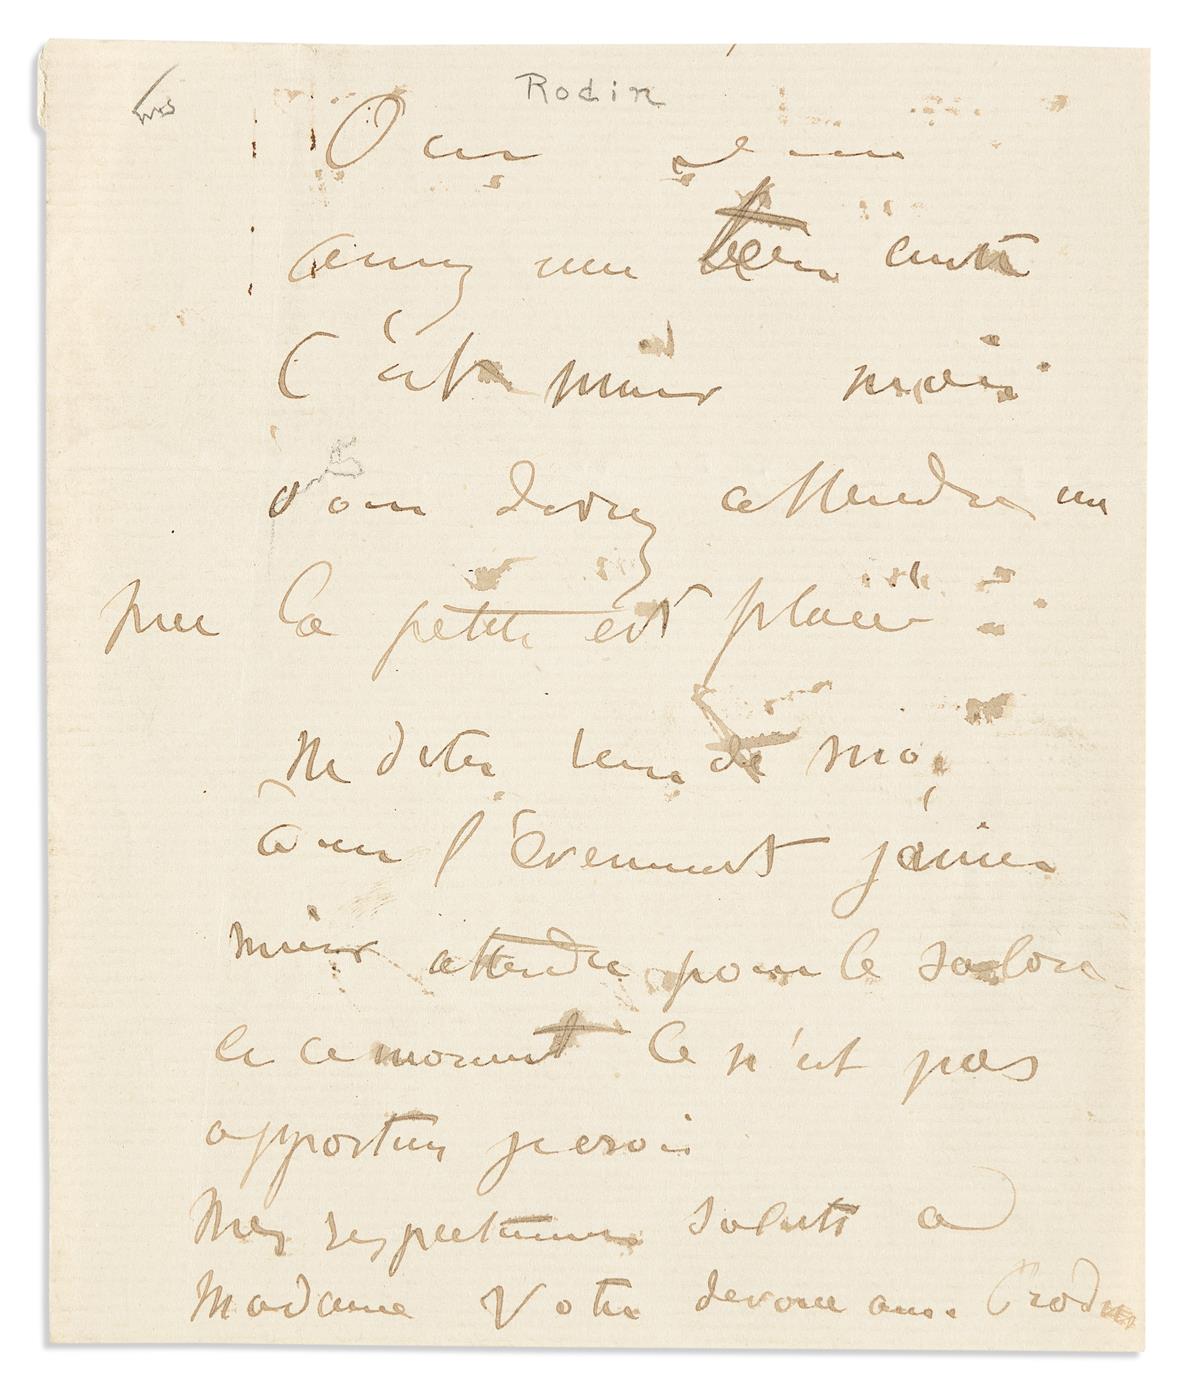 RODIN, AUGUSTE. Autograph Note Signed, Rodin, to an unnamed recipient (lacking salutation), in French,